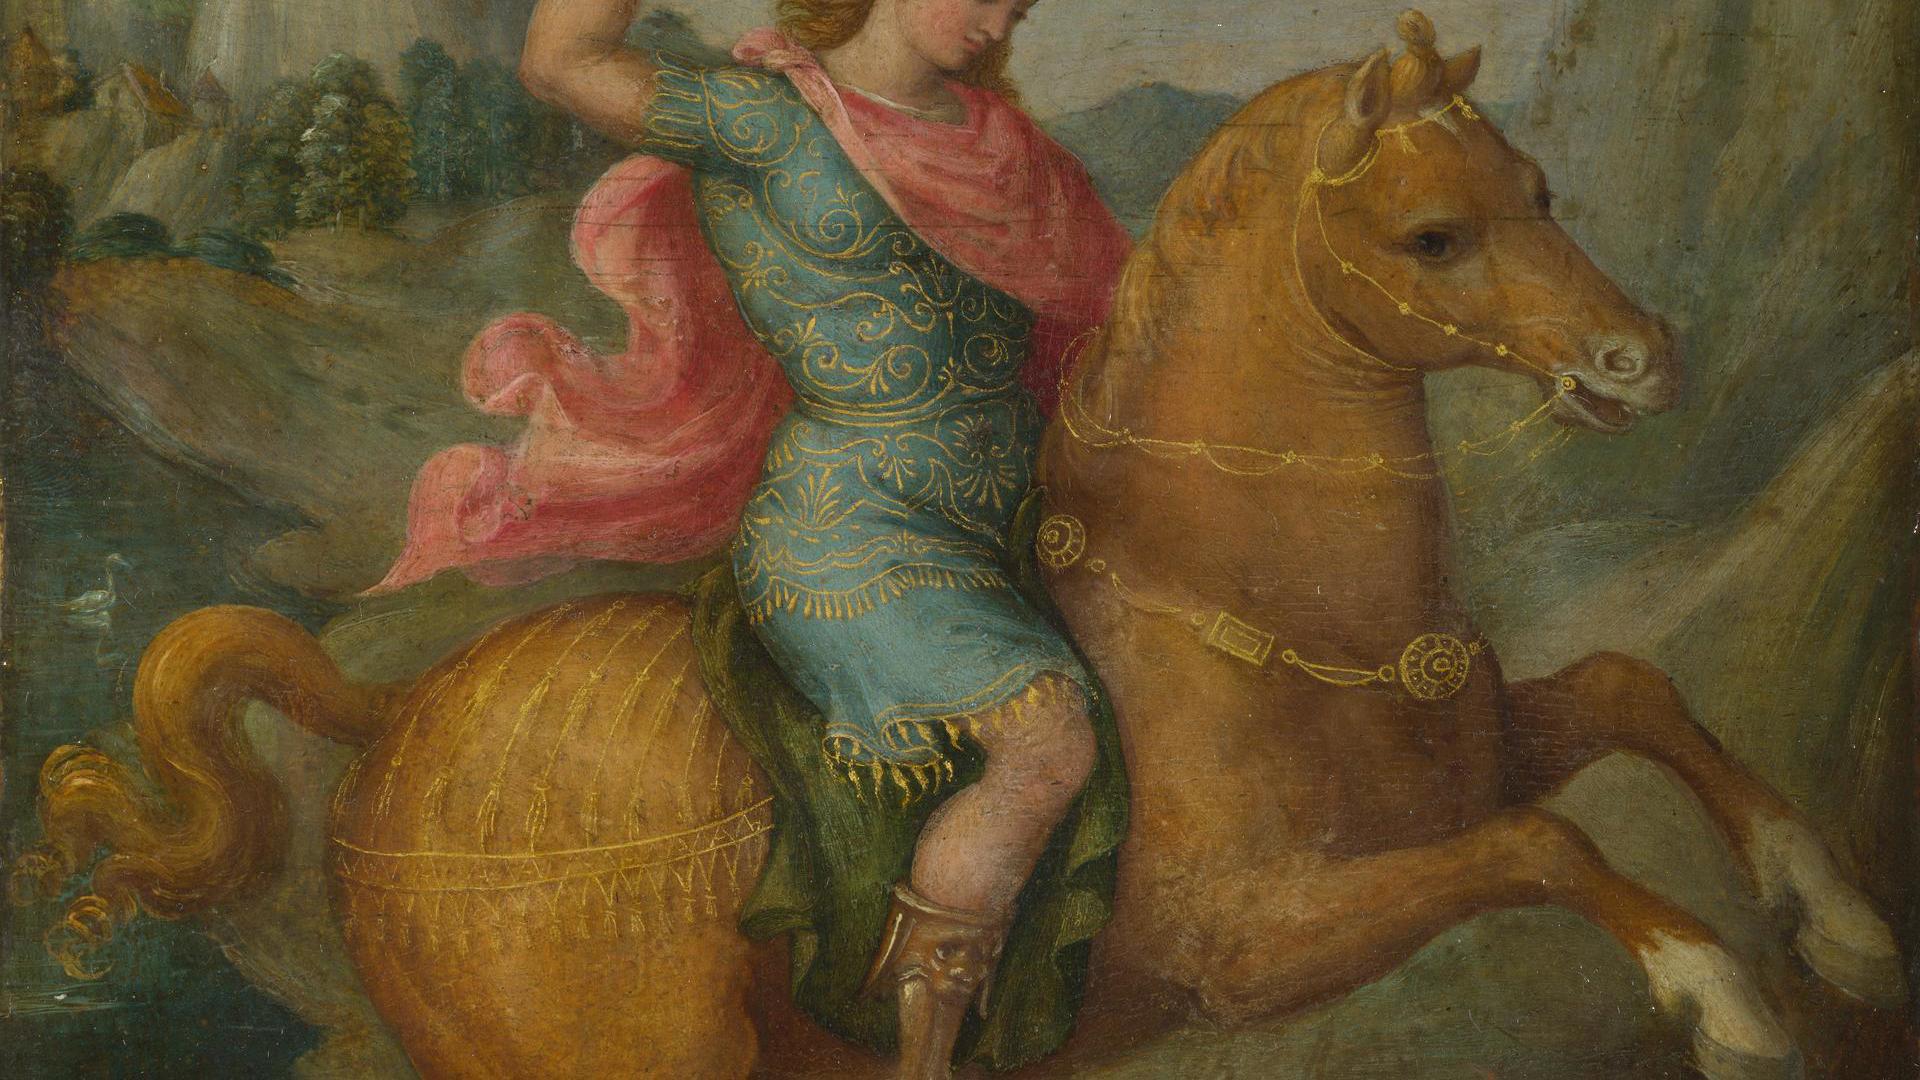 Marcus Curtius by Possibly by Bacchiacca